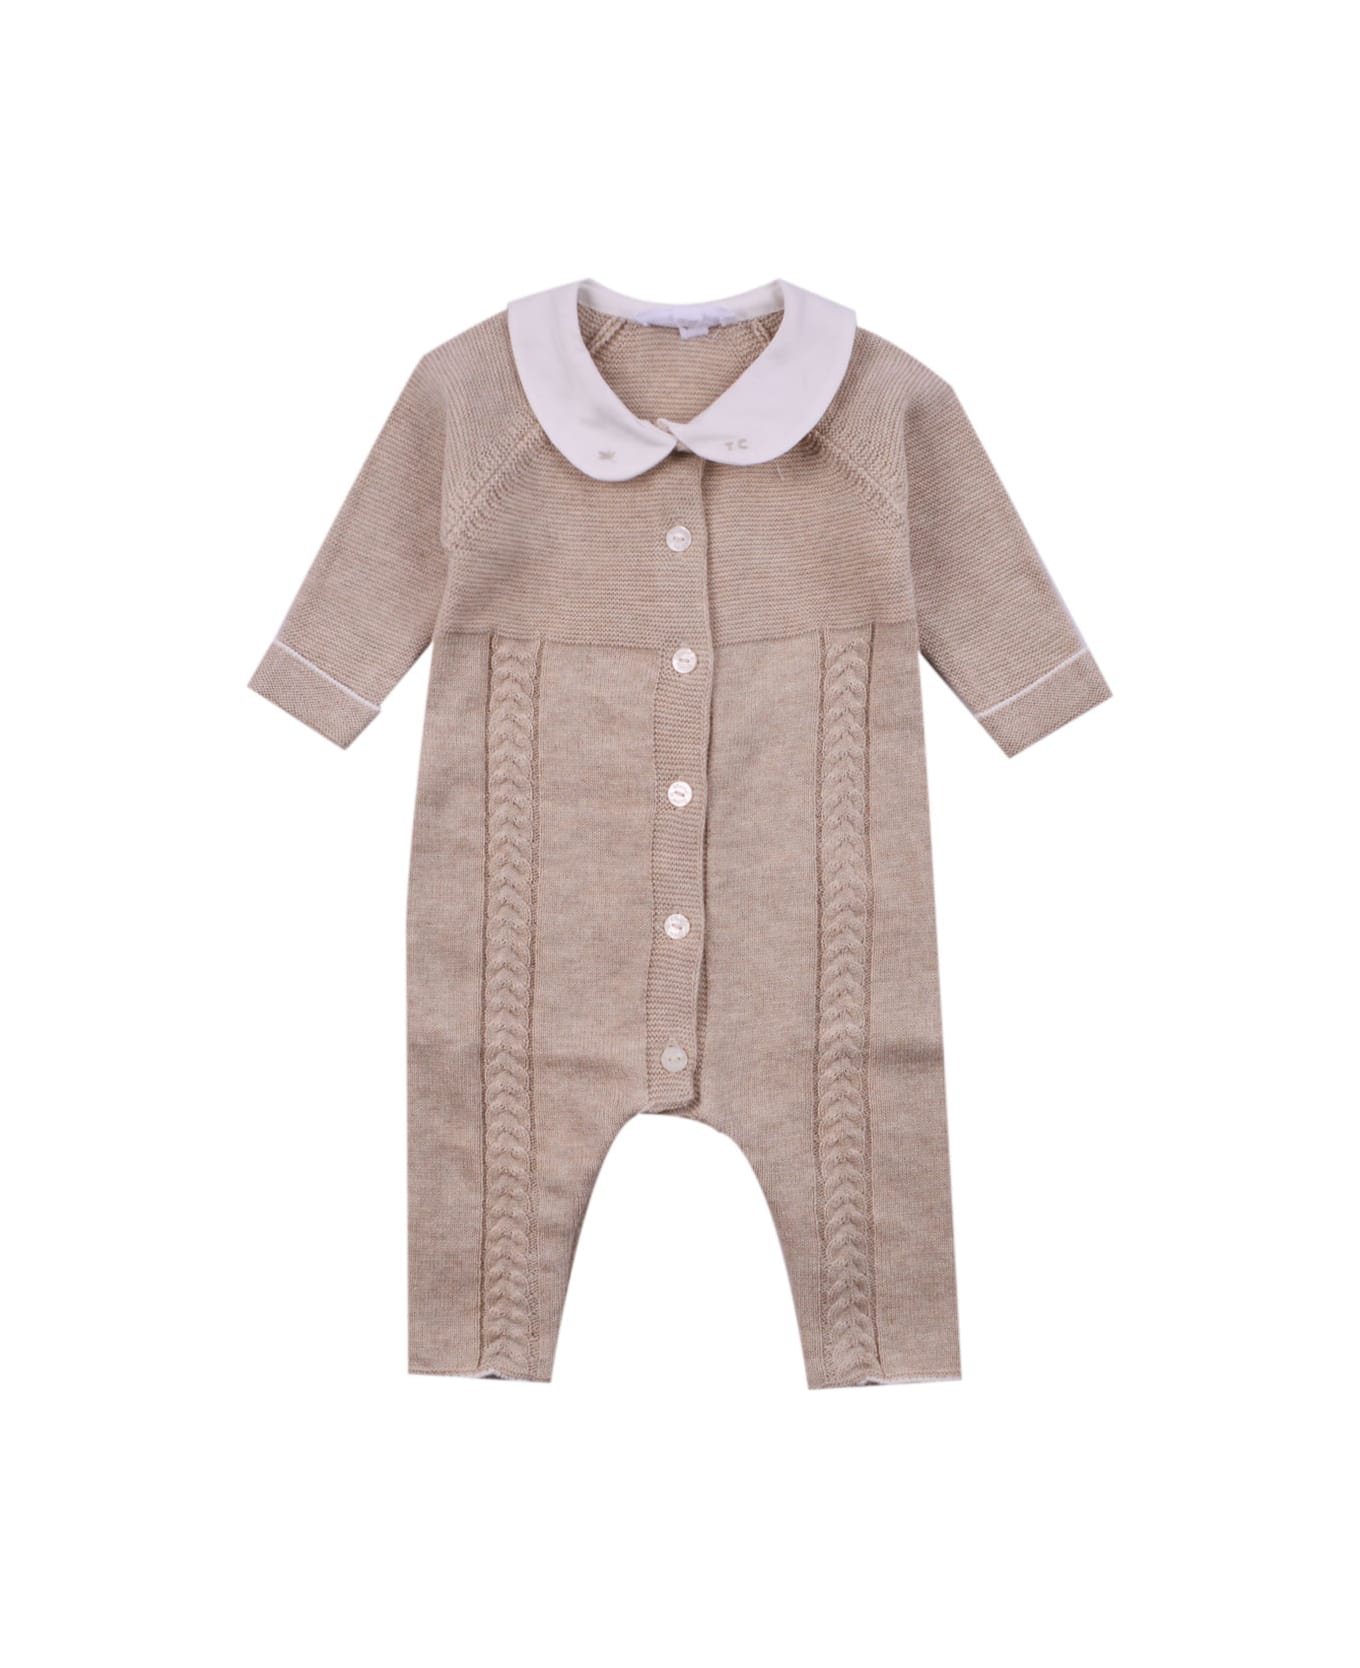 Tartine et Chocolat Knitted Romper With Embroidered Collar - Beige ボディスーツ＆セットアップ